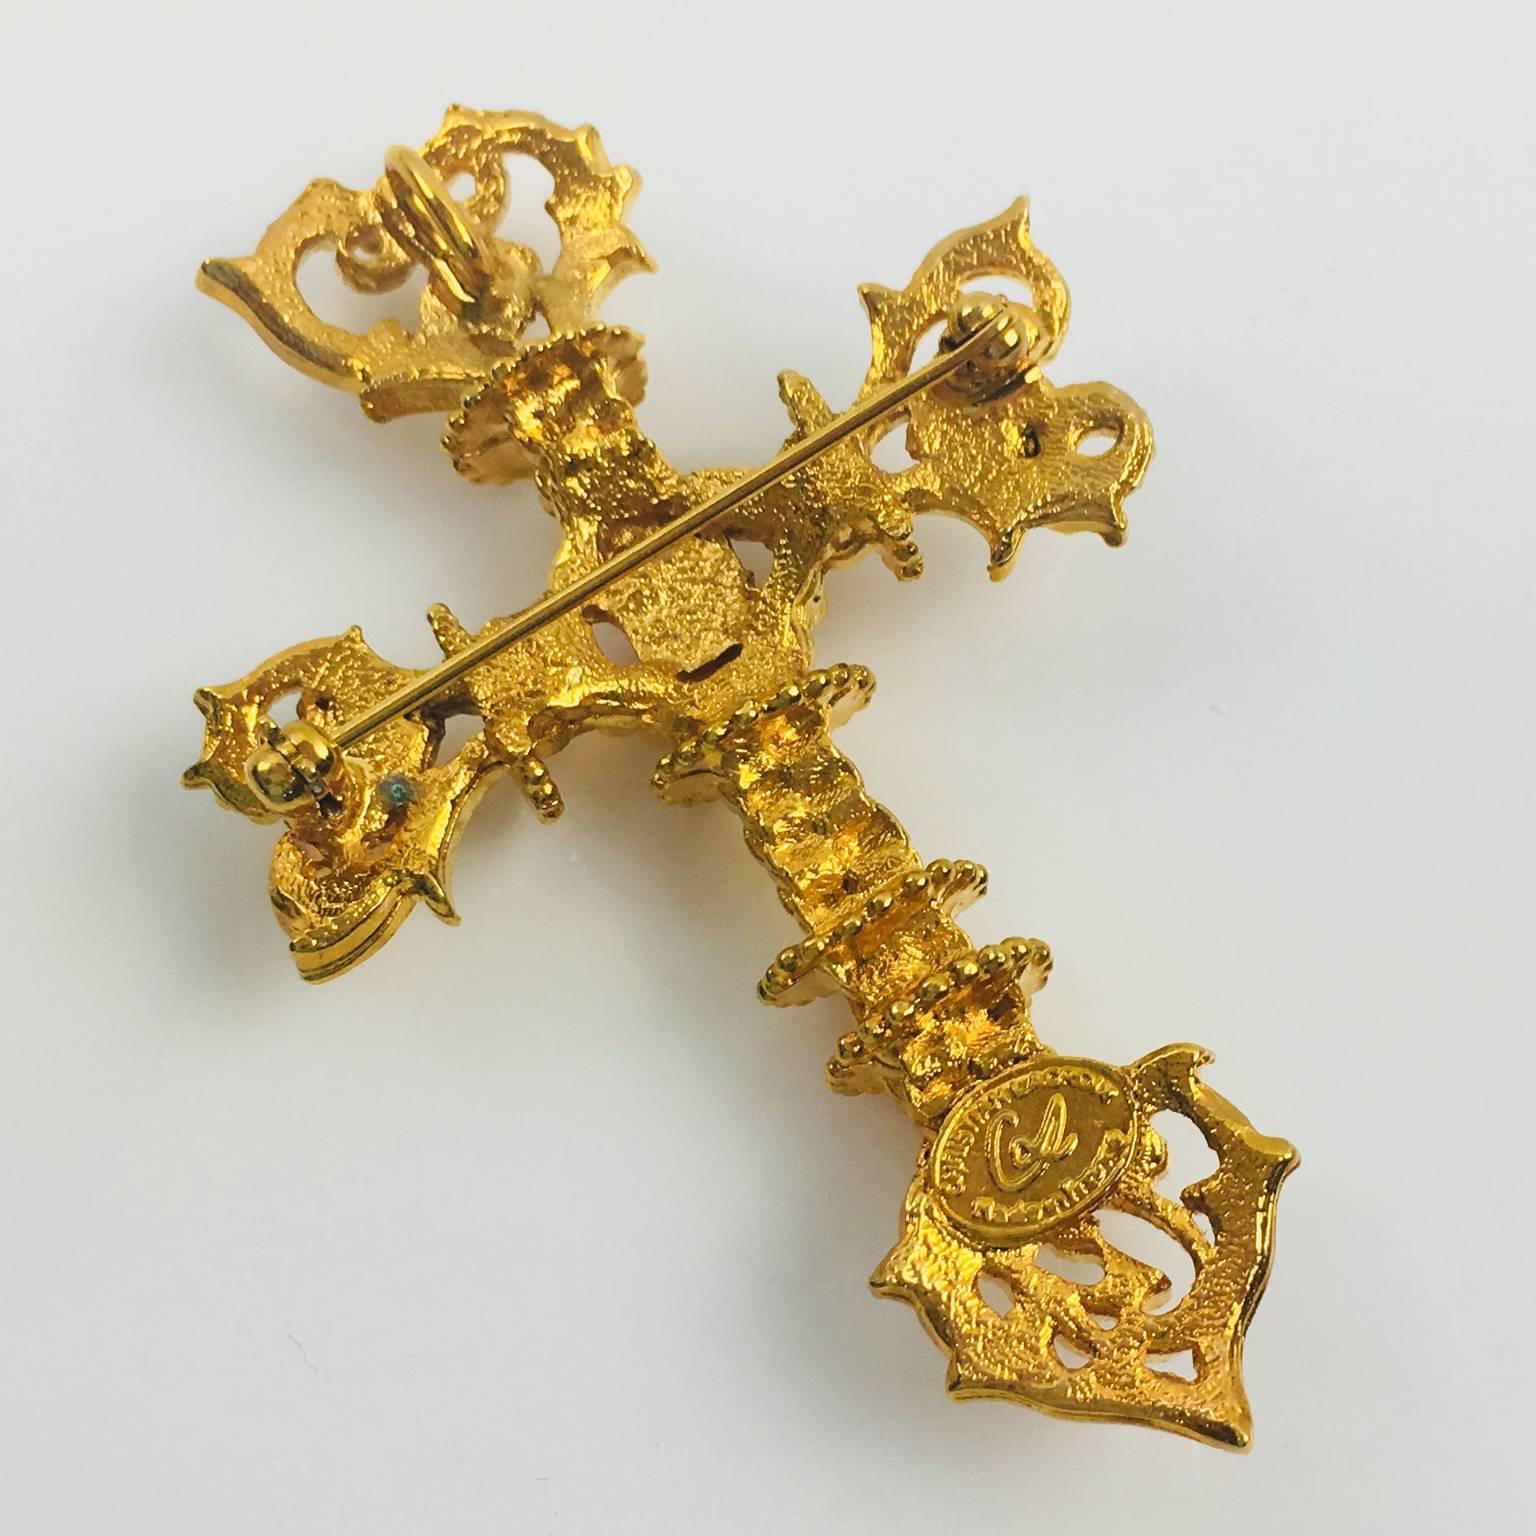 Stunning Christian Lacroix Paris signed Pin Brooch. Lovely gilt metal extremely textured, pierced and see thru shape featuring a large baroque cross. Signed at the back 